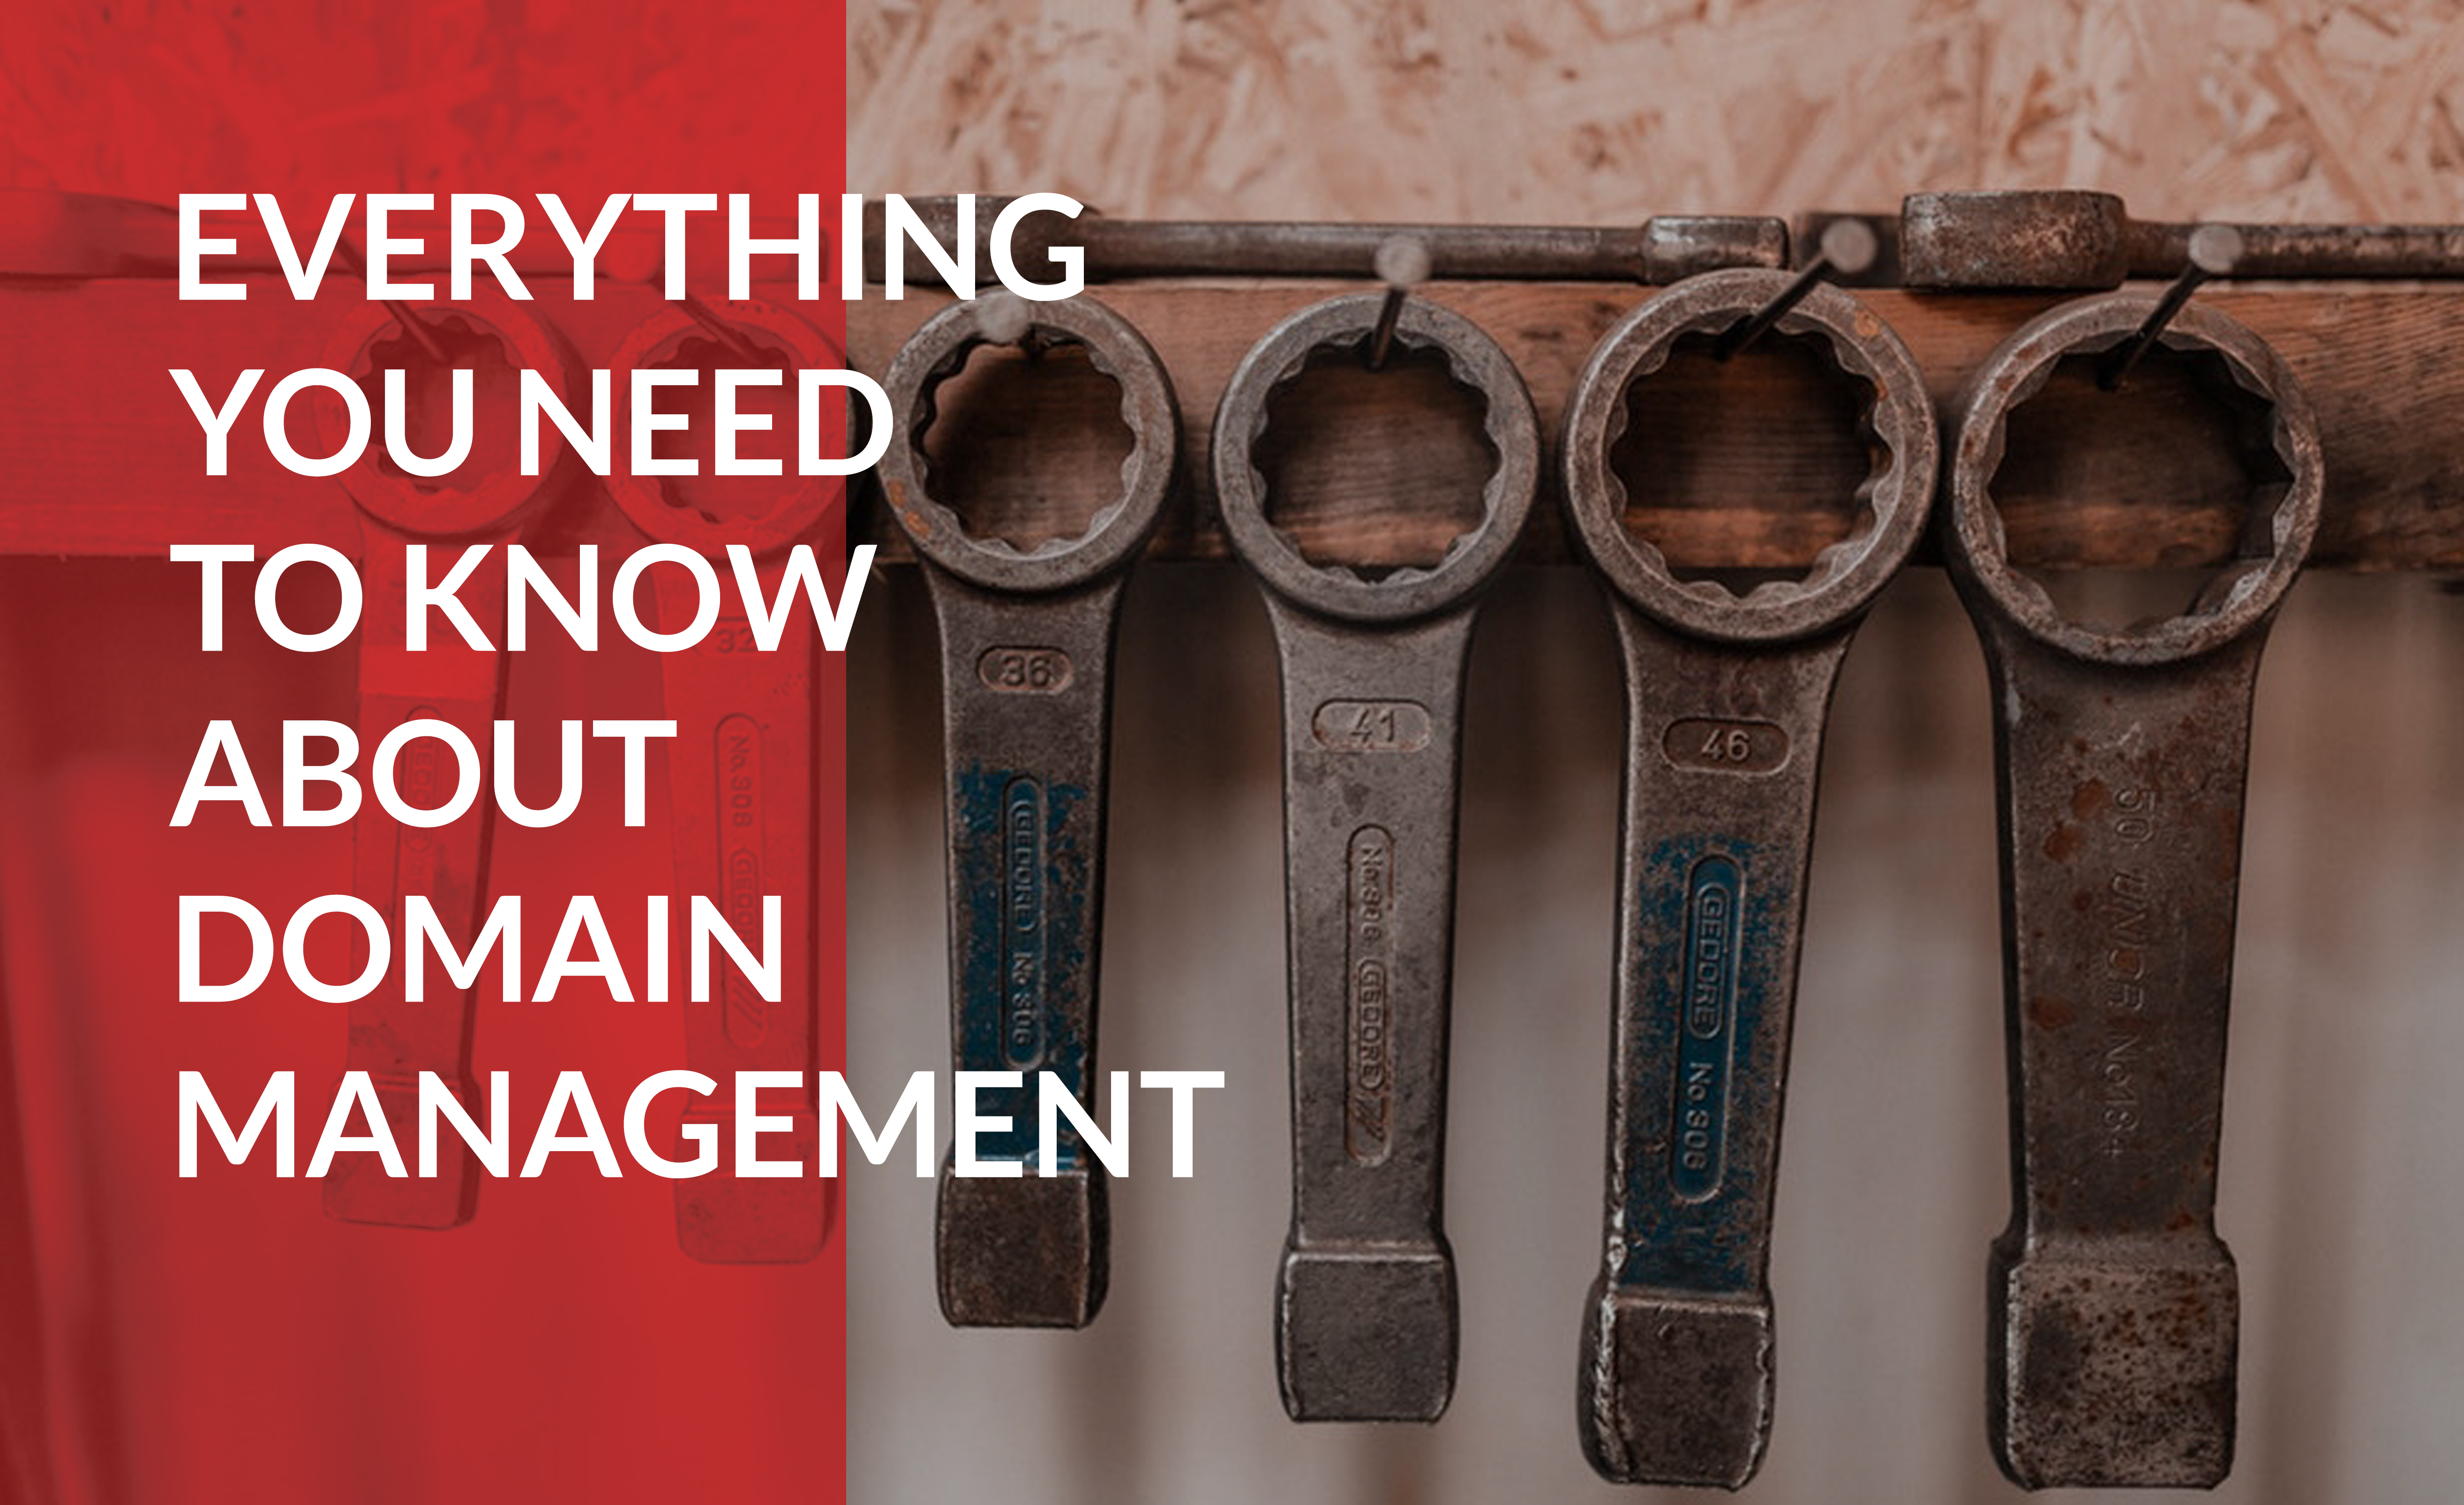 Learn everything you need to know about domain management